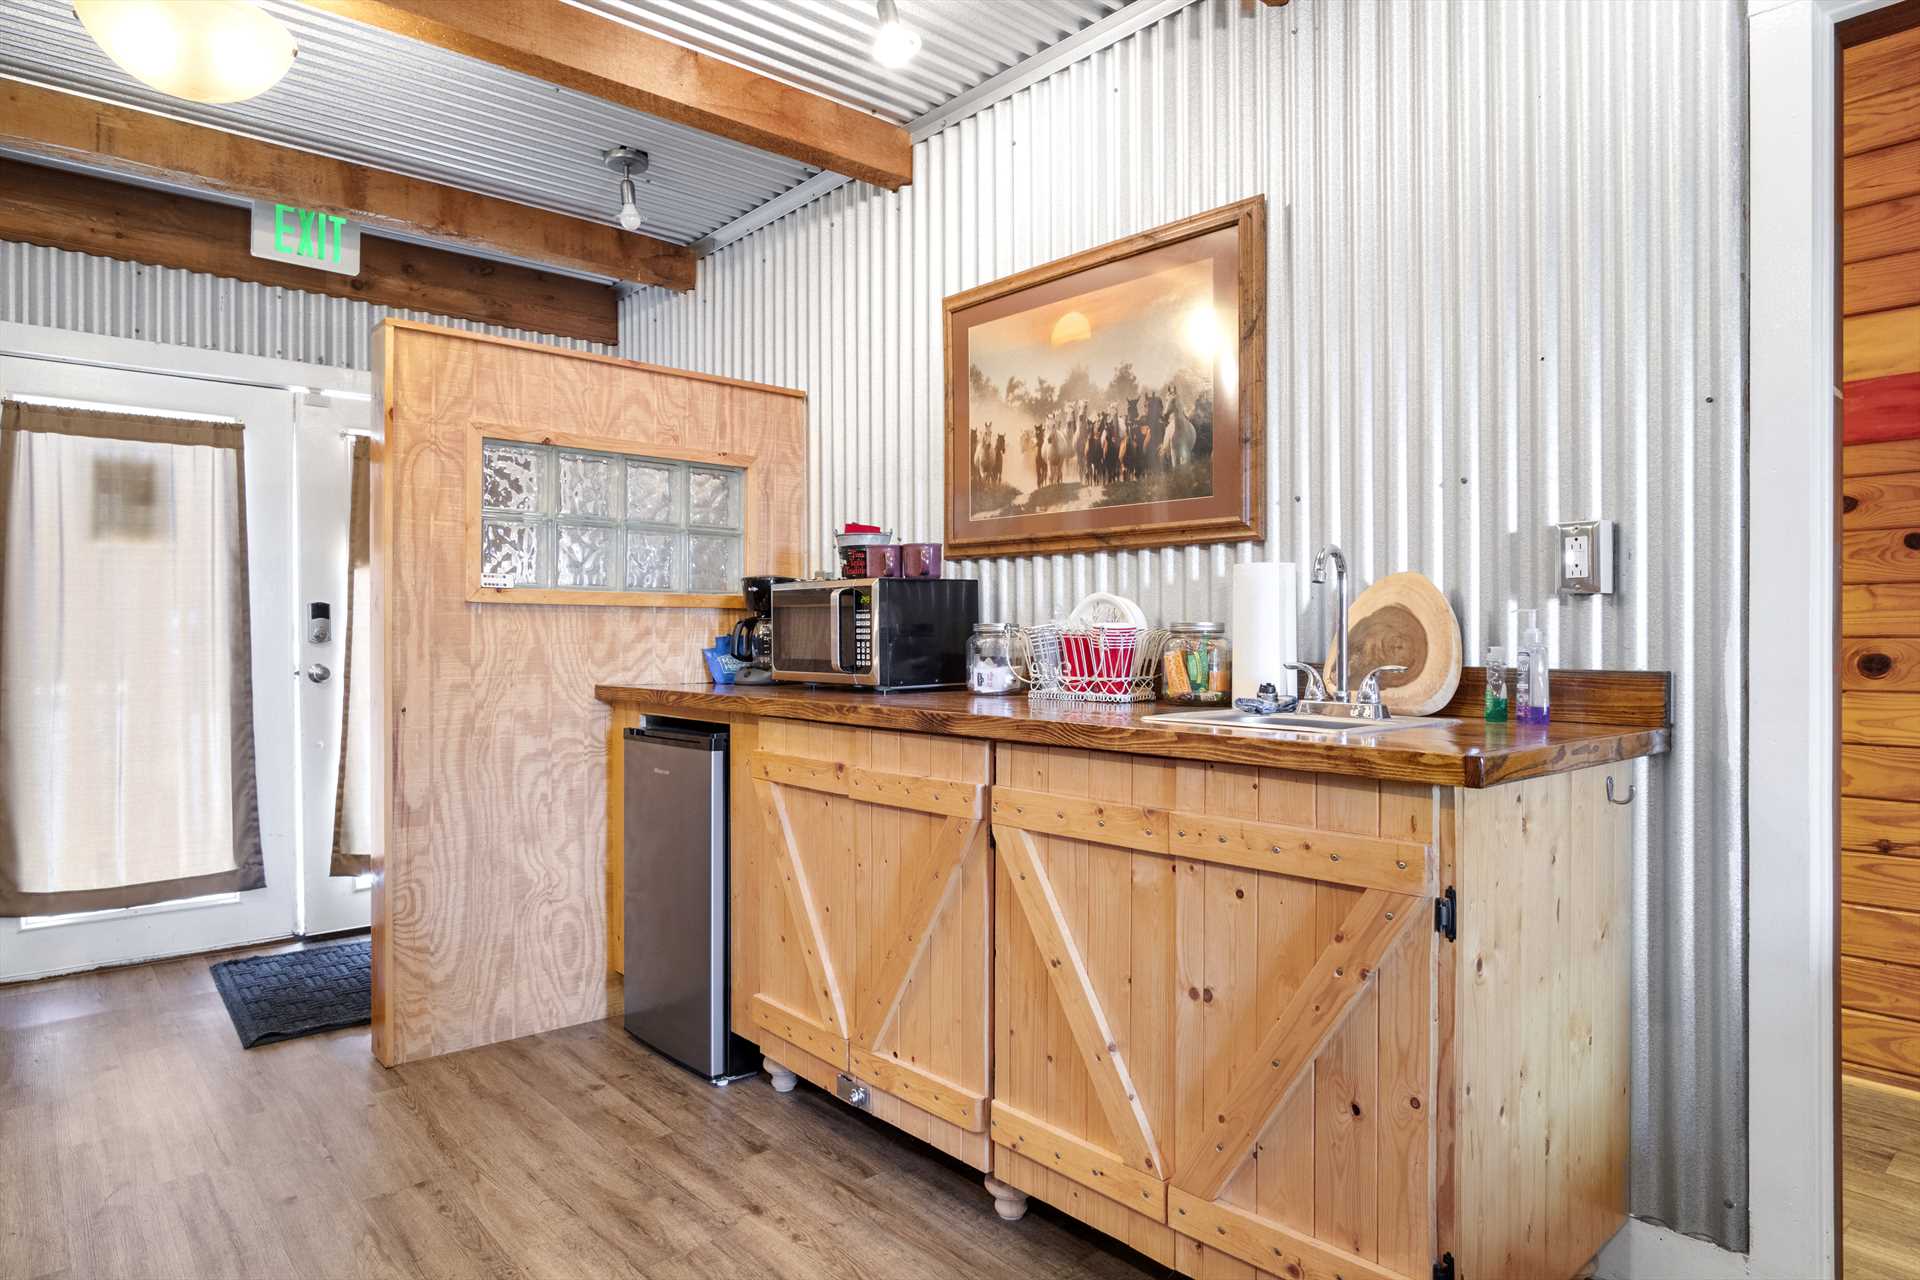                                                 Barn-style woodwork and corrugated steel give the Hideaway Cabin a rustic ranch feel, it's perfect for the Cowboy Capital of the World!